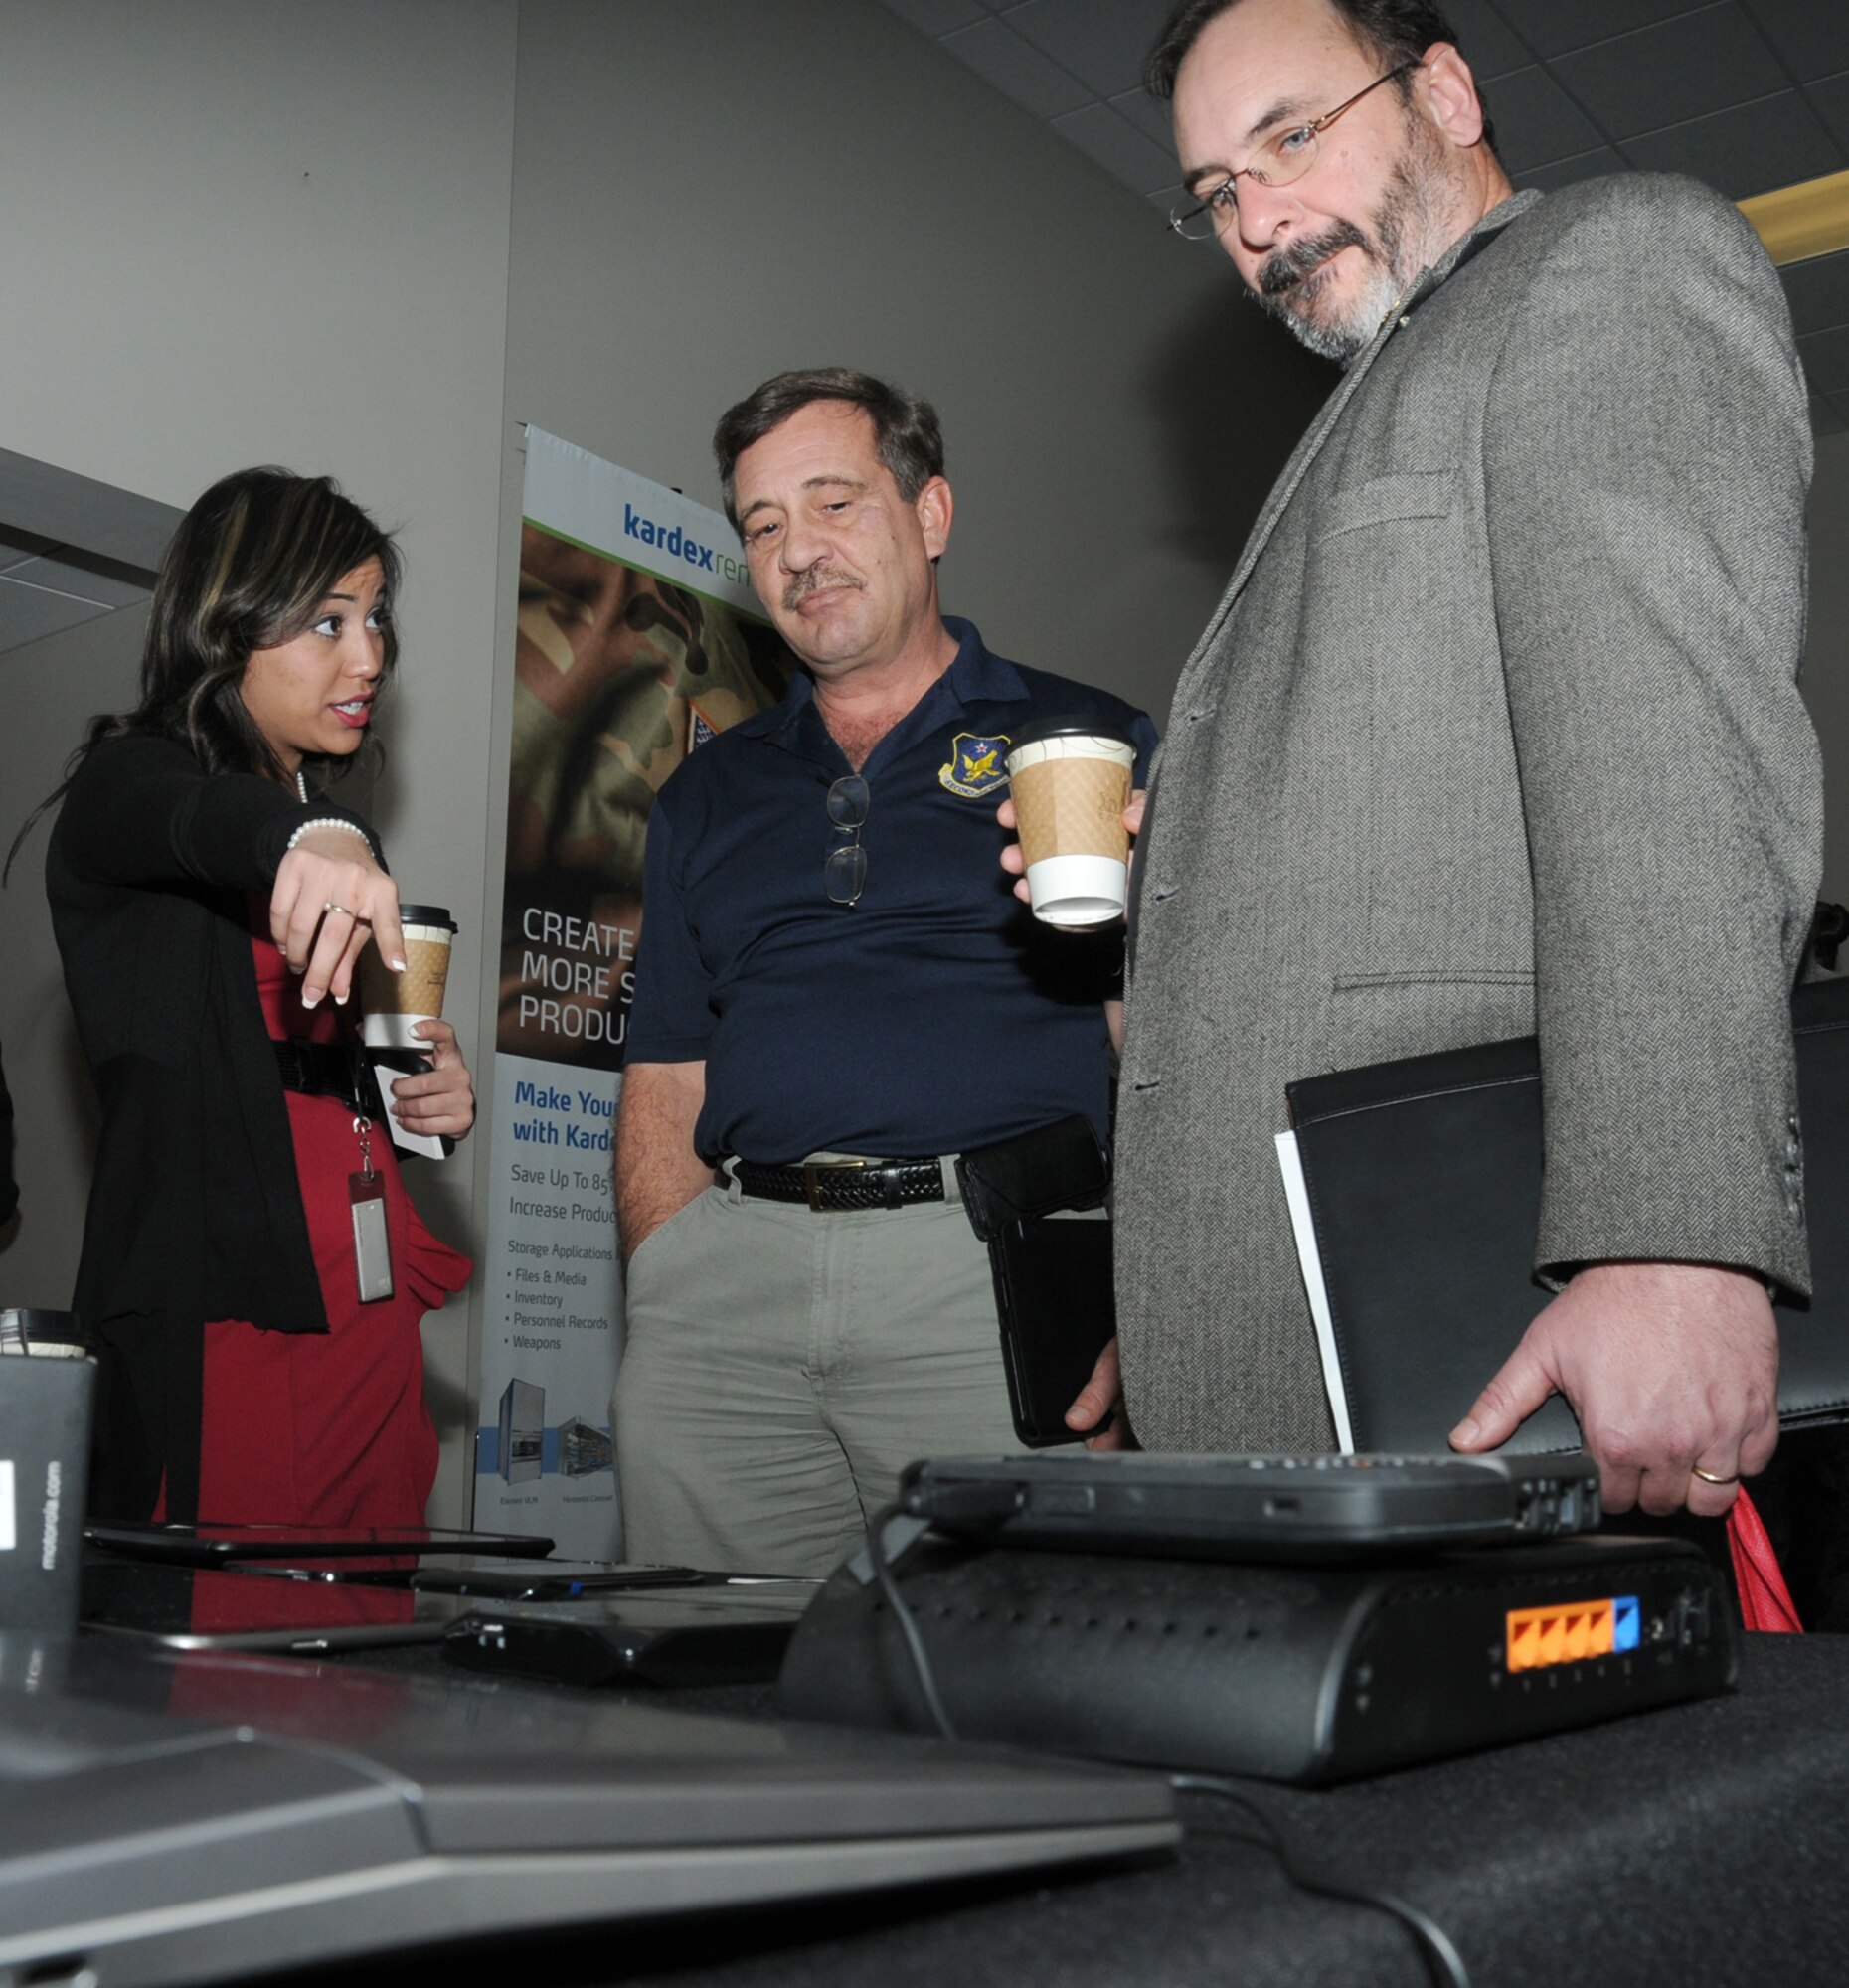 Colette Nieves, Sprint account manager, shows Ricky Collison and Steve Ellis, 2nd Air Force, various equipment Sprint offers during a technology expo Jan. 9, 2012, at the Roberts Consolidated Aircraft Maintenance Facility, Keesler Air Force Base, Miss.  The 17th annual free expo, hosted by the 81st Training Support Squadron, featured more than 40 exhibitors.  (U.S. Air Force photo by Kemberly Groue)